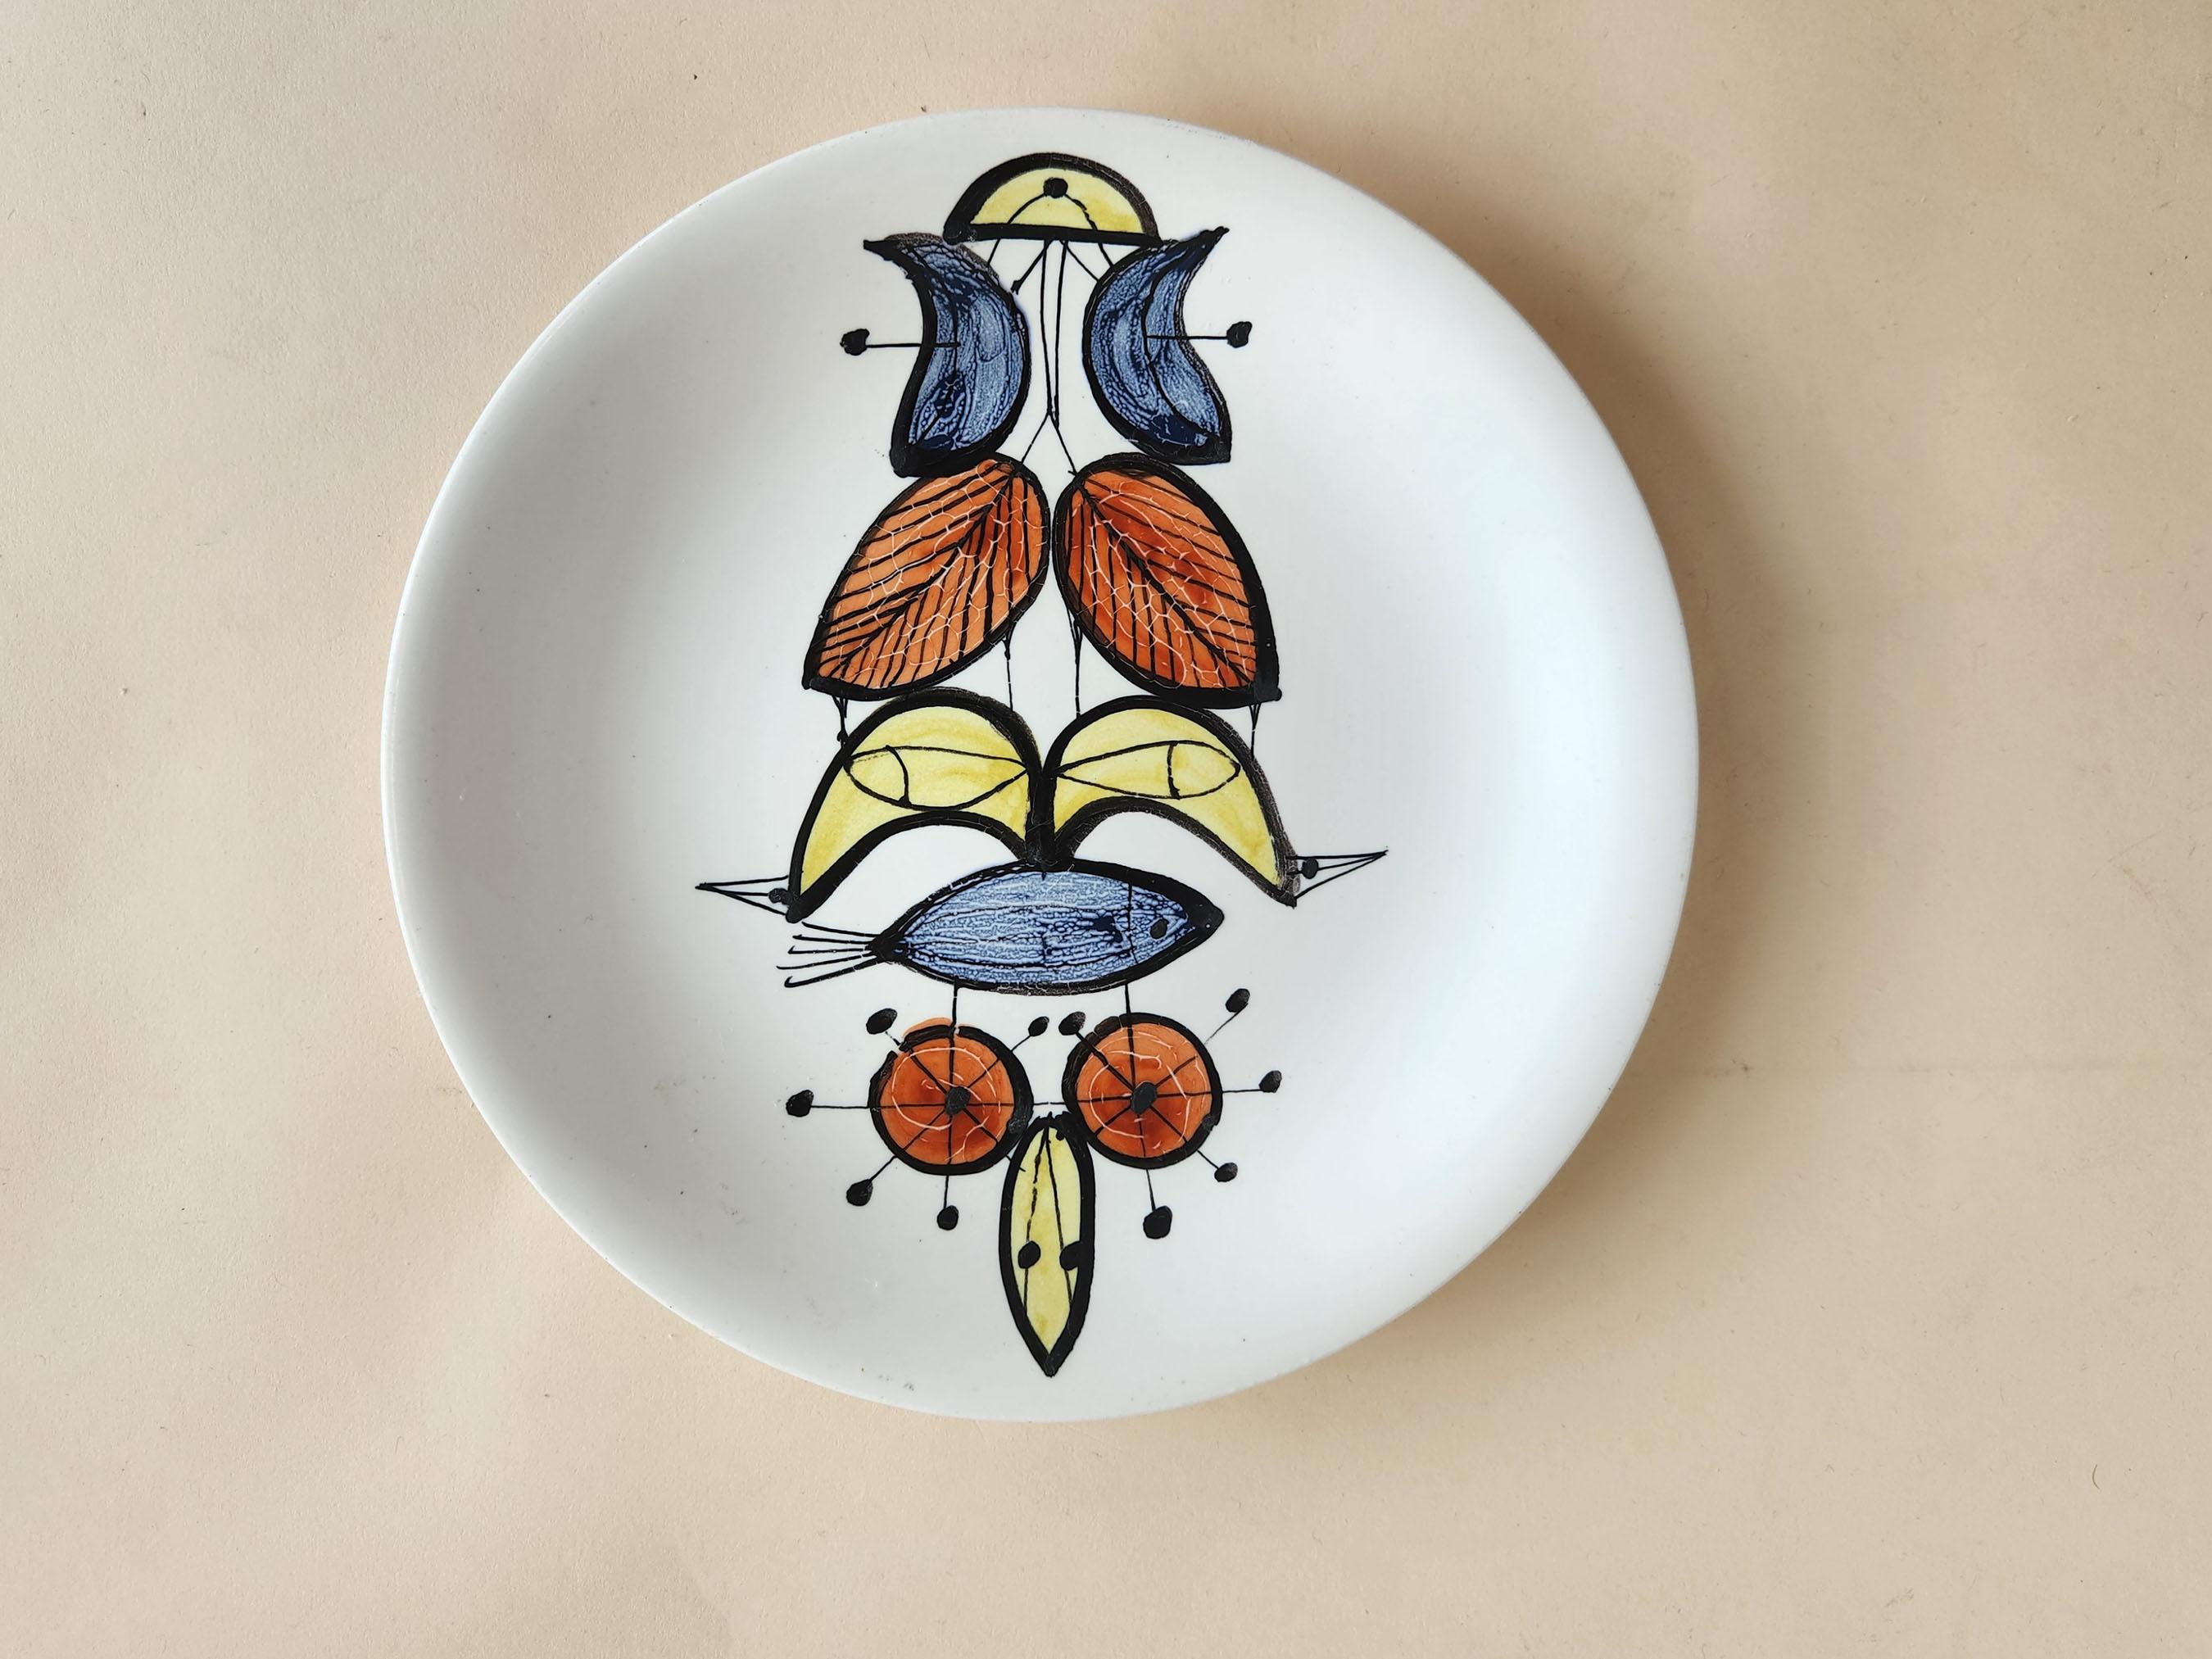 Vintage Ceramic Plate with Abstract Motive by Roger Capron - Vallauris, France

Roger Capron was in influential French ceramicist, known for his tiled tables and his use of recurring motifs such as stylized branches and geometrical suns.   He was